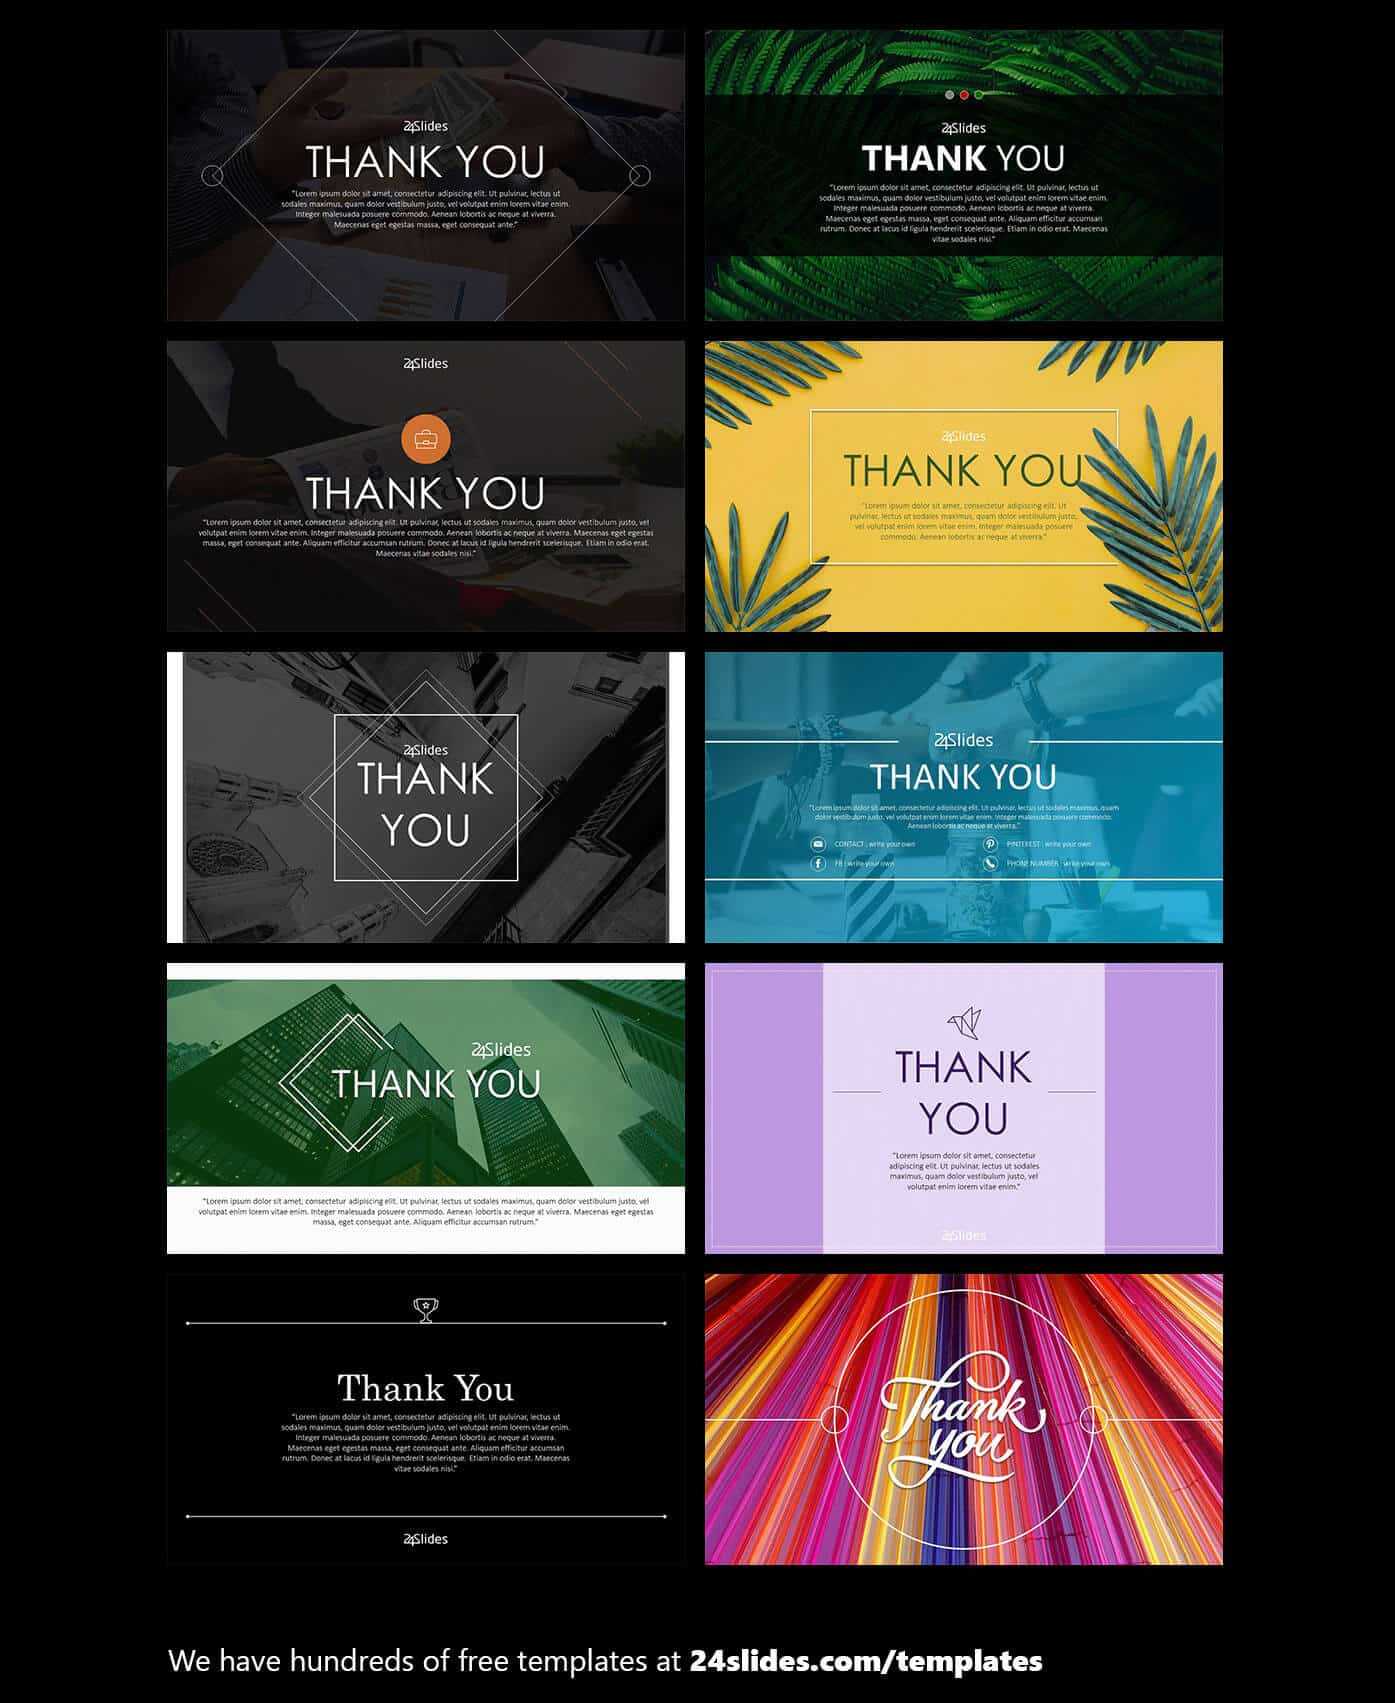 15 Fun And Colorful Free Powerpoint Templates | Present Better Regarding Fun Powerpoint Templates Free Download